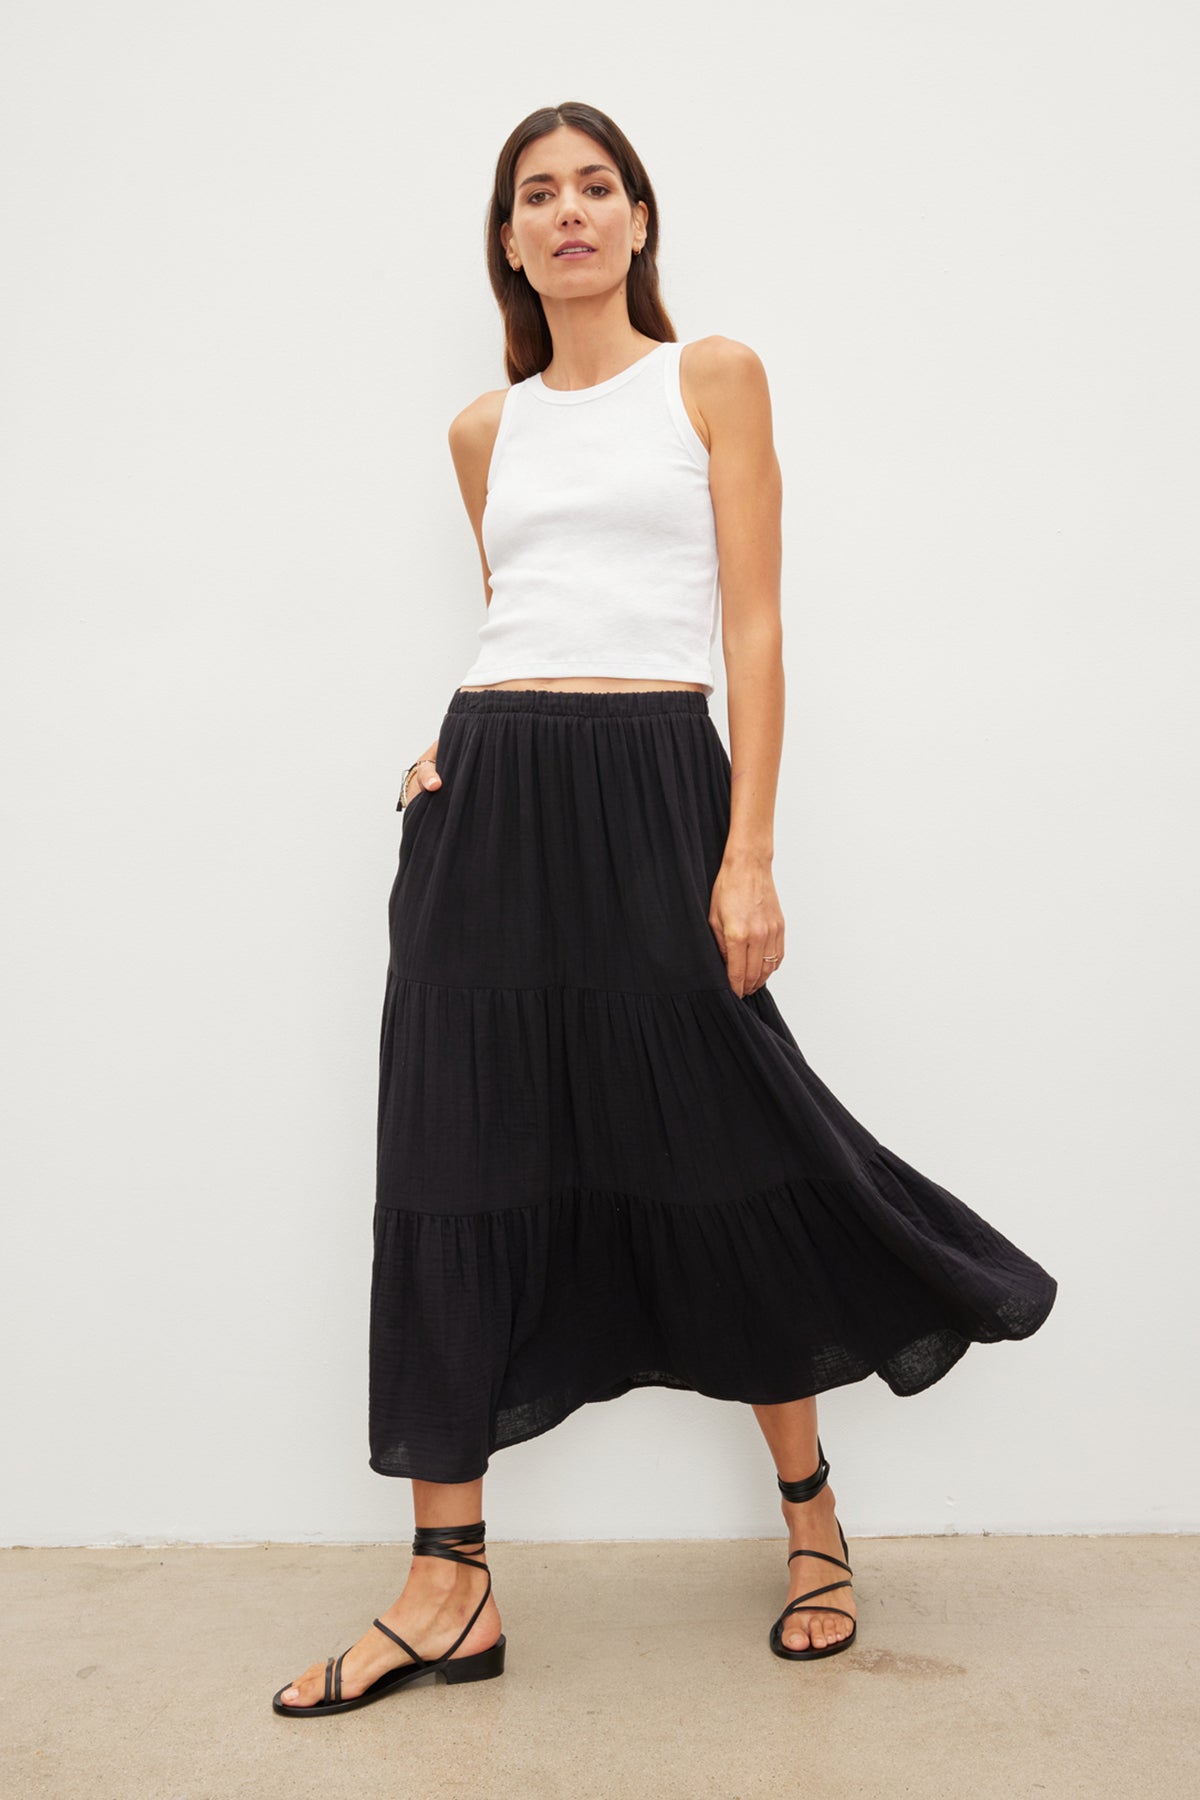 A woman stands against a plain background wearing a white tank top, a DANIELLE COTTON GAUZE TIERED SKIRT by Velvet by Graham & Spencer with an elastic waist, and black strappy sandals.-36443592687809